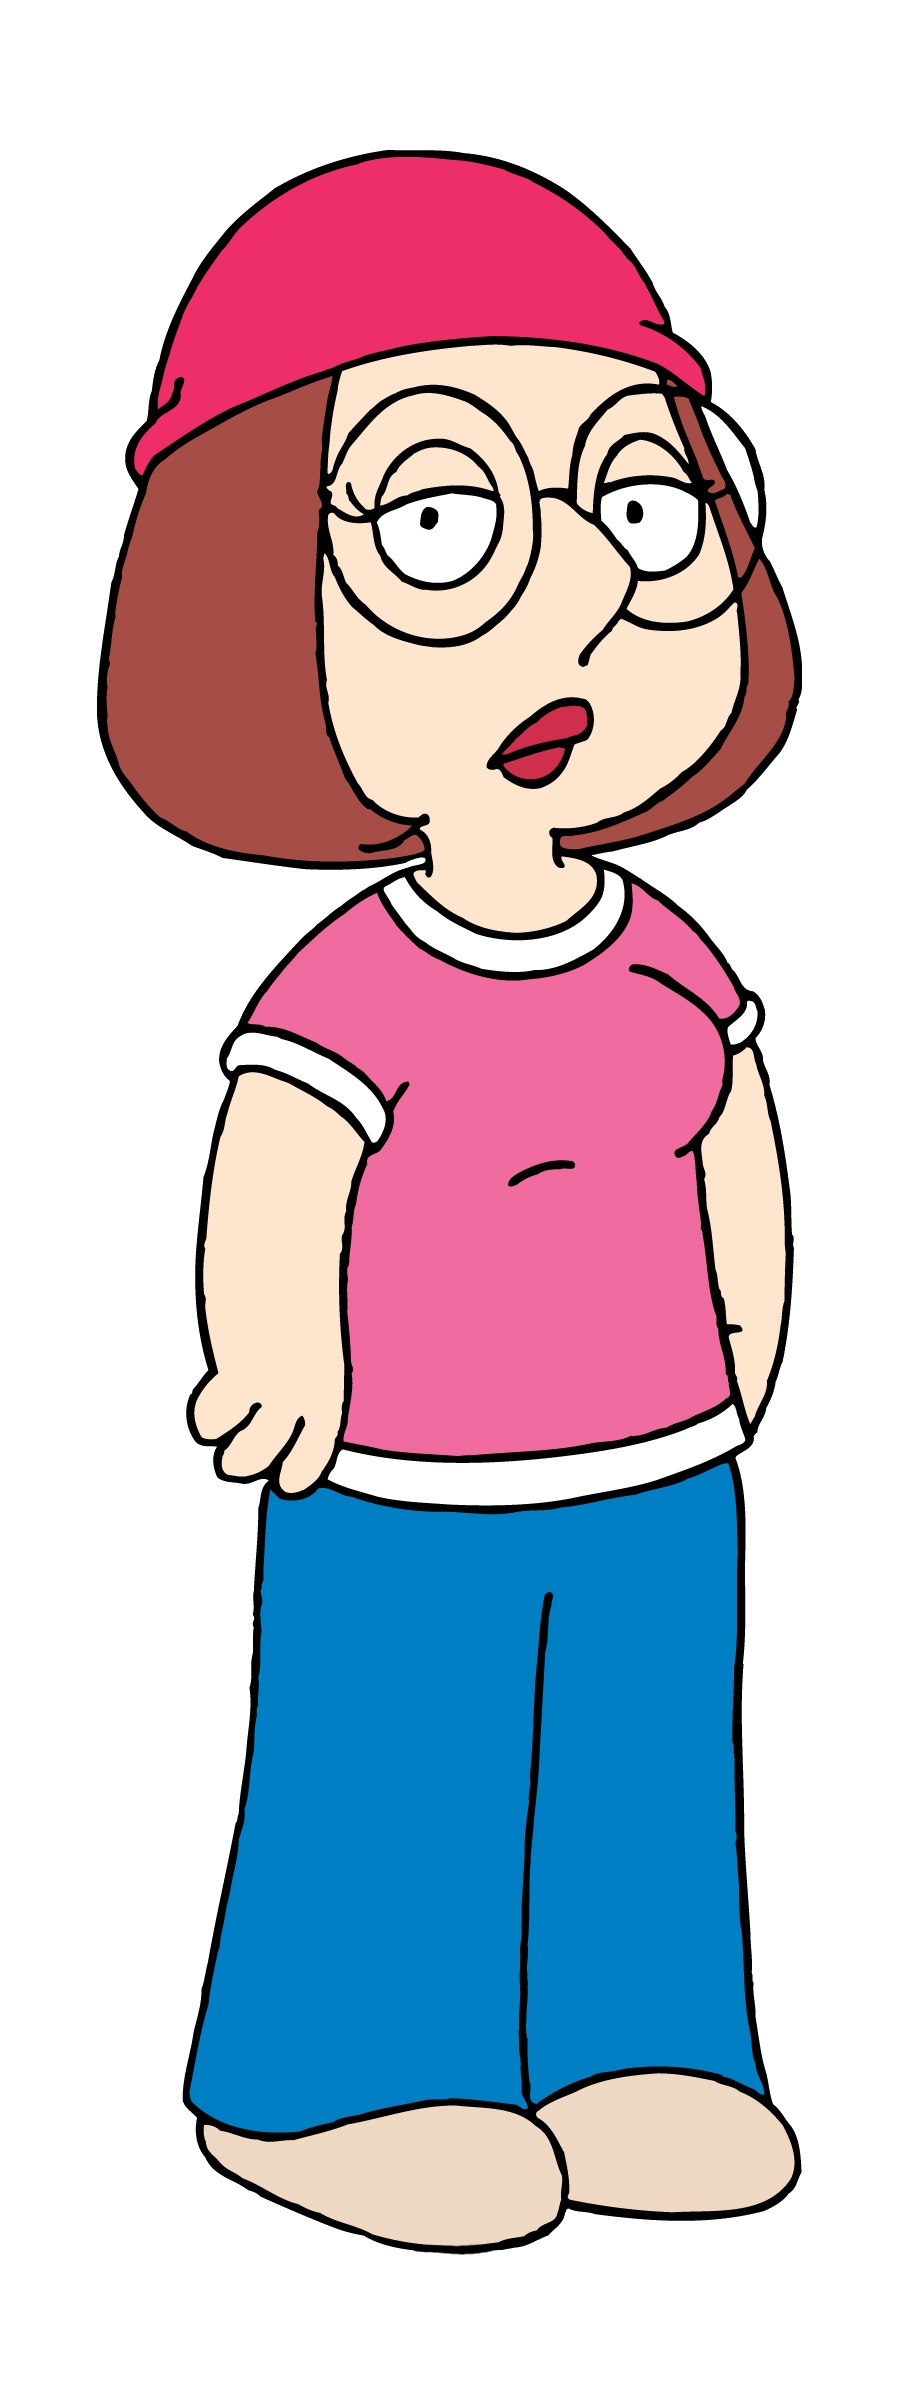 Ugly Girl Cartoon | Free Download Clip Art | Free Clip Art | on ...